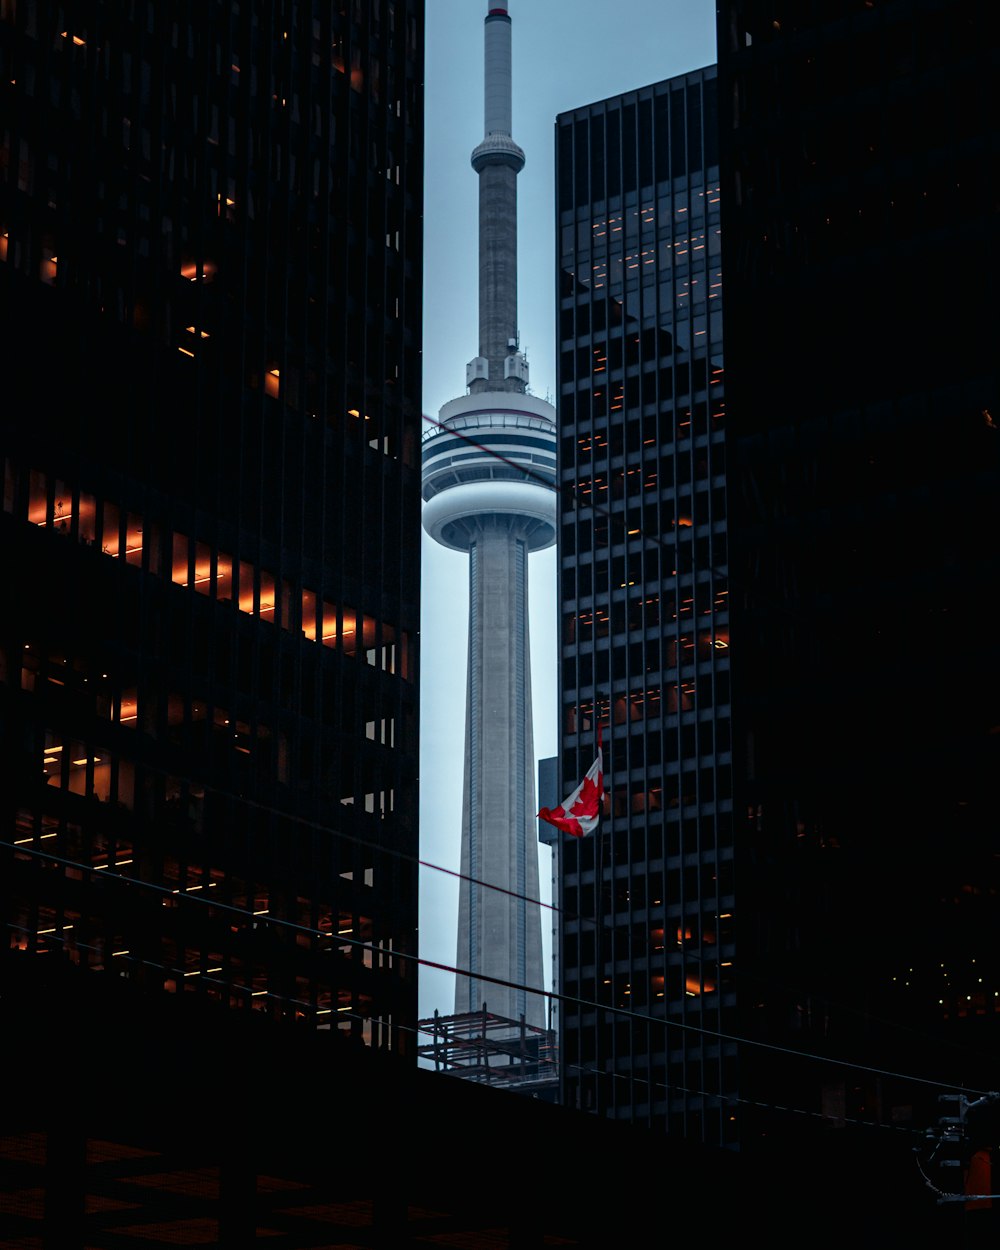 a view of the cn tower from across the street